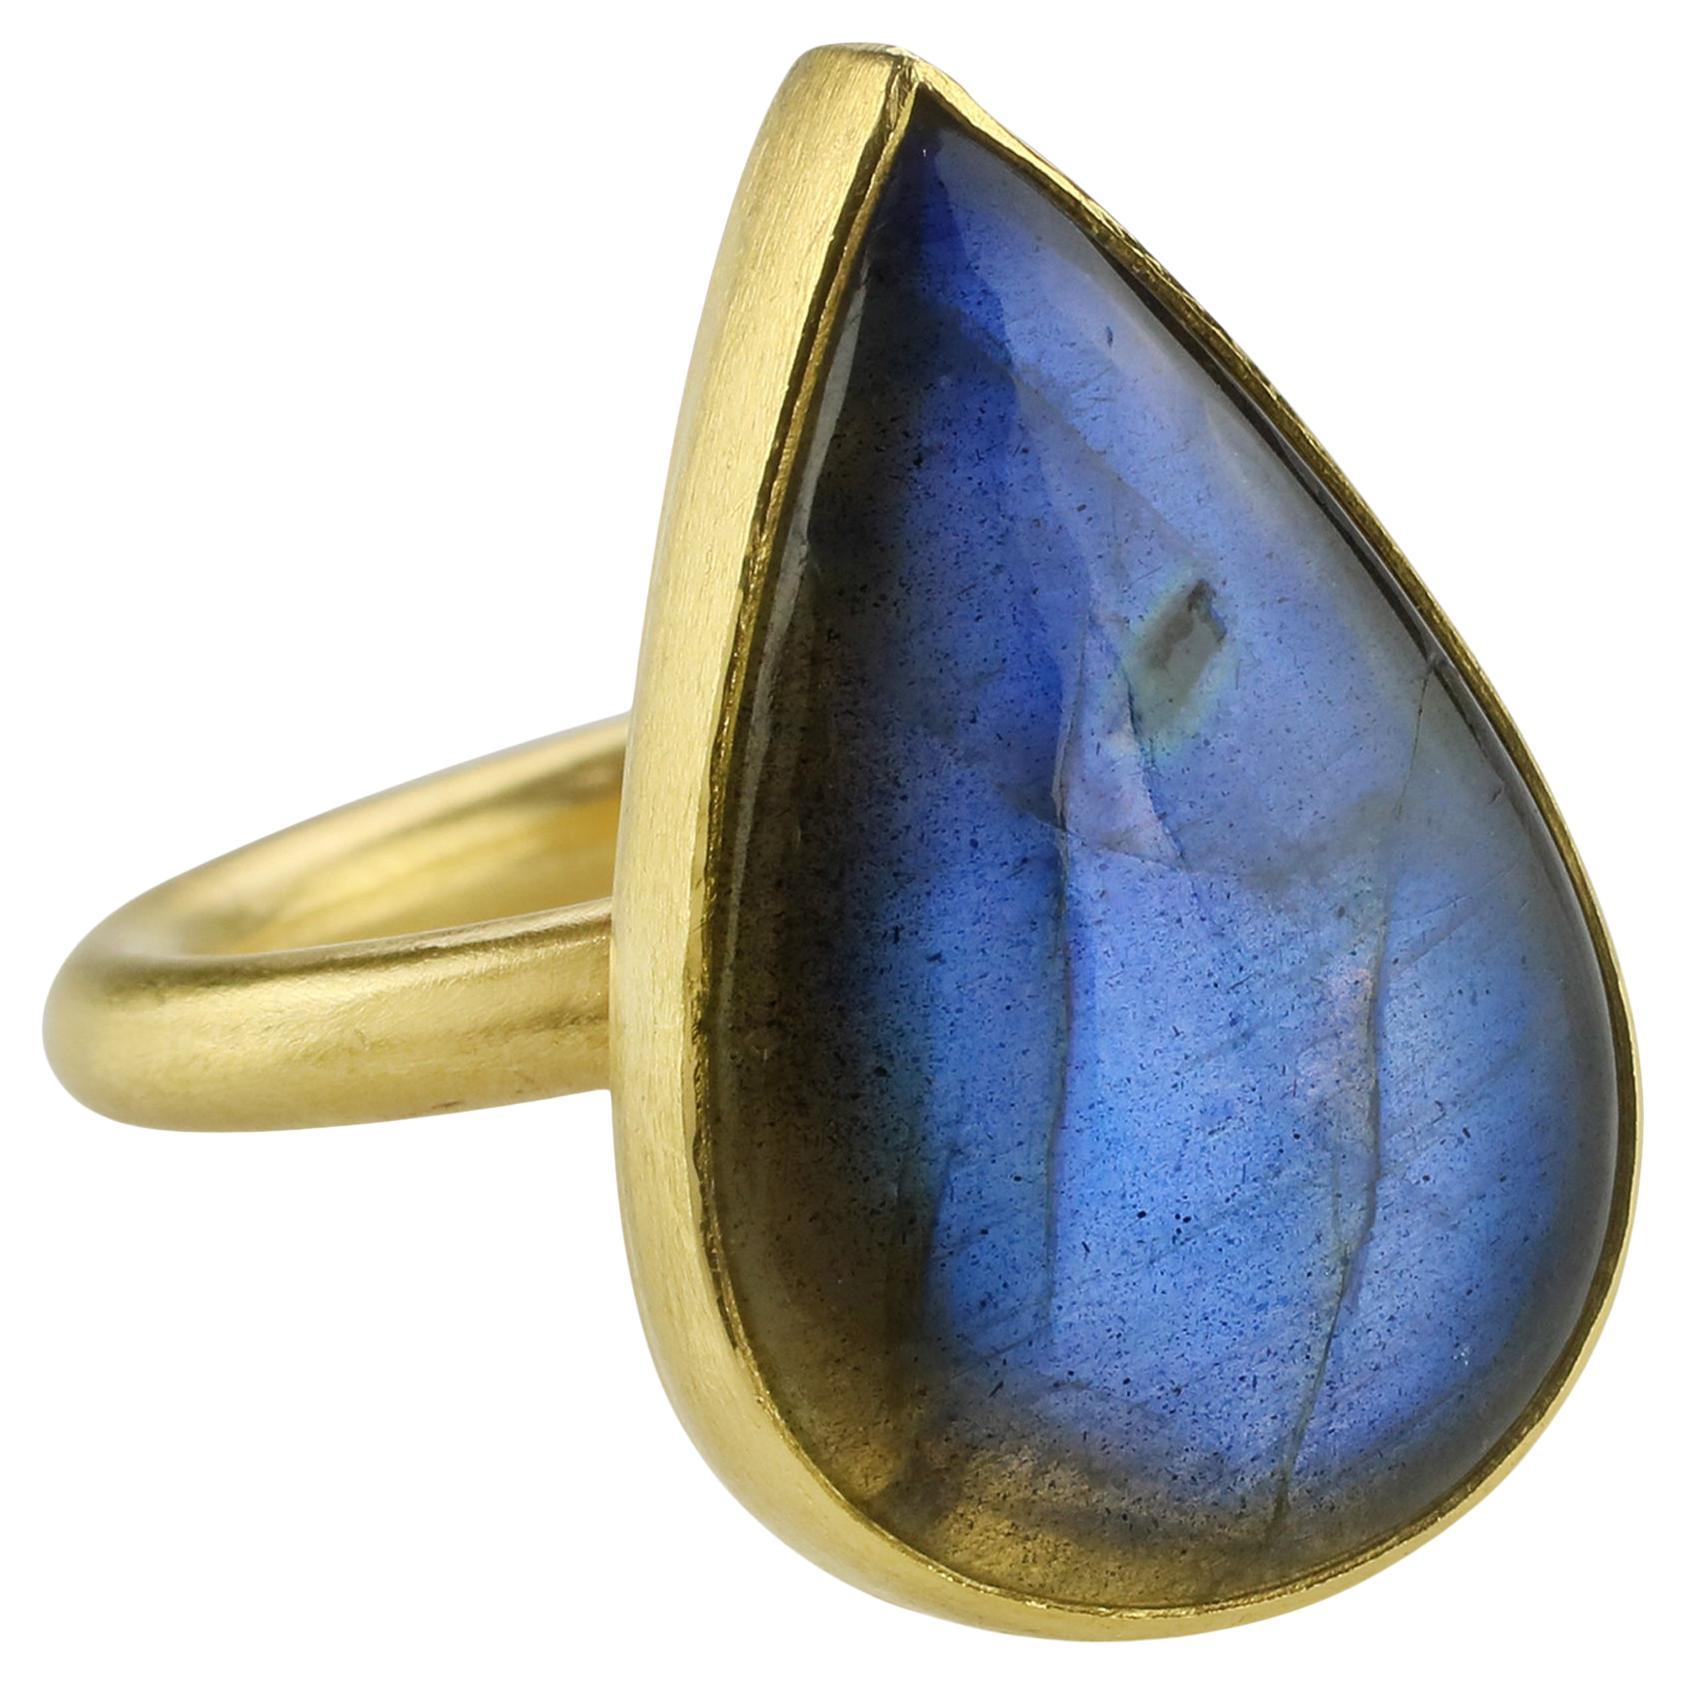 PHILIPPE SPENCER 20.87 Ct. Labradorite in 22K and 20K Gold Statement Ring